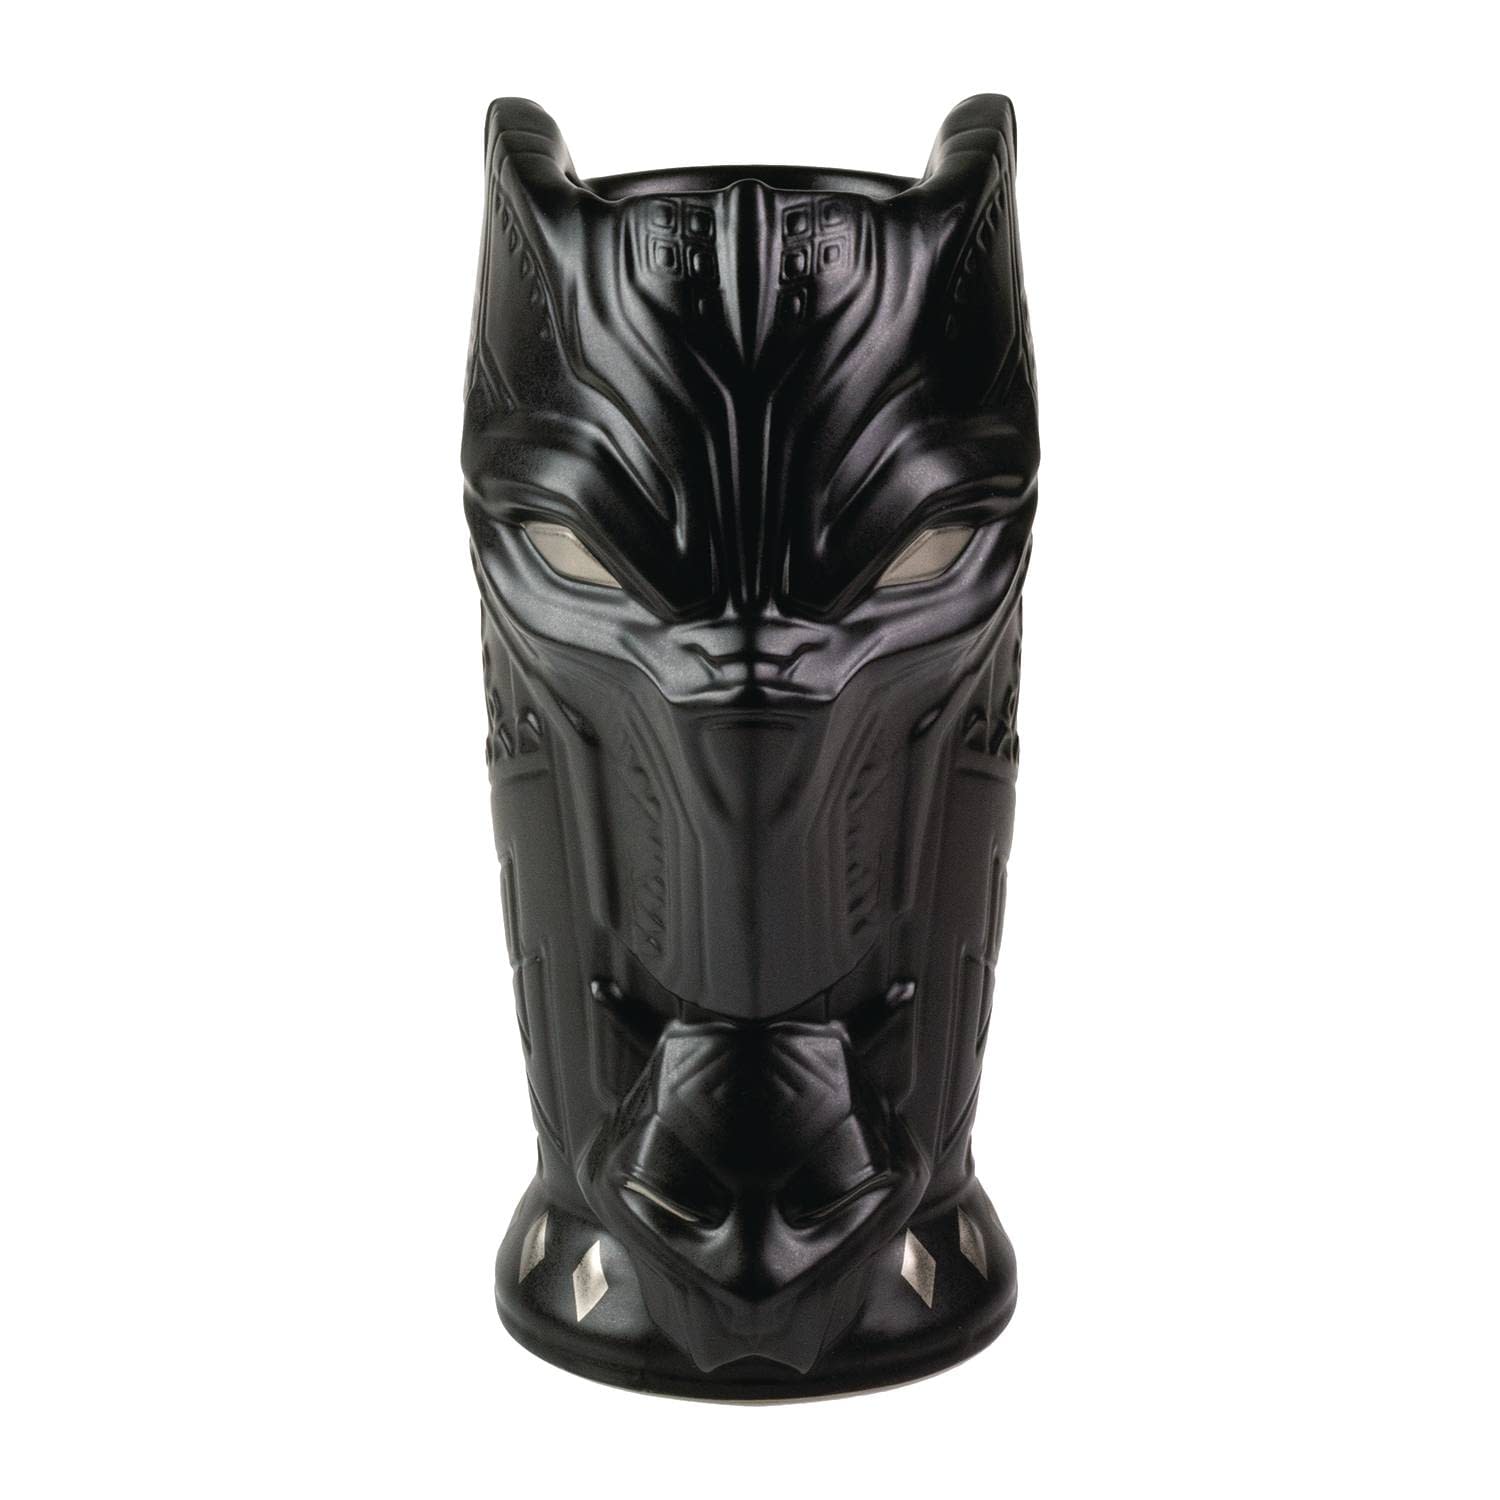 Limited Edition Black Panther PX Previews Exclusives Arrive